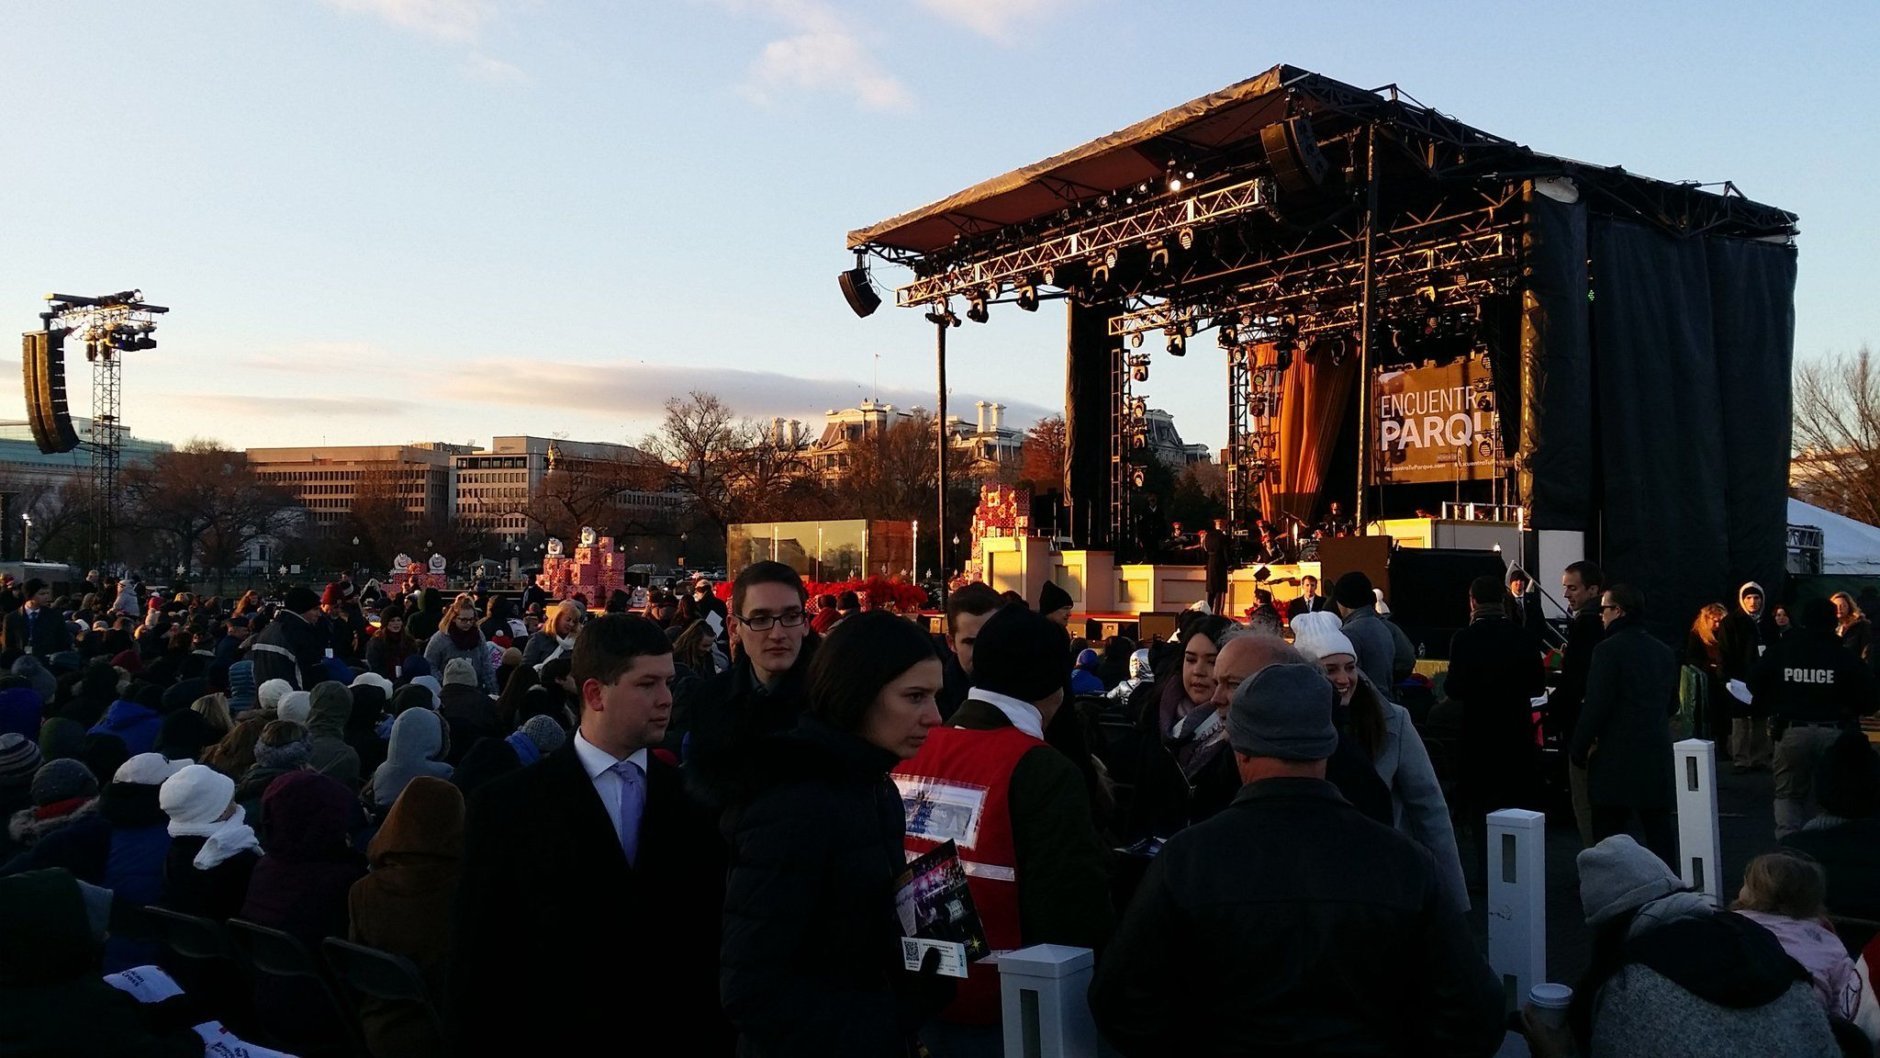 A festive crowd braved the chilly conditions for Wednesday's festivities. (WTOP/J. Brooks)